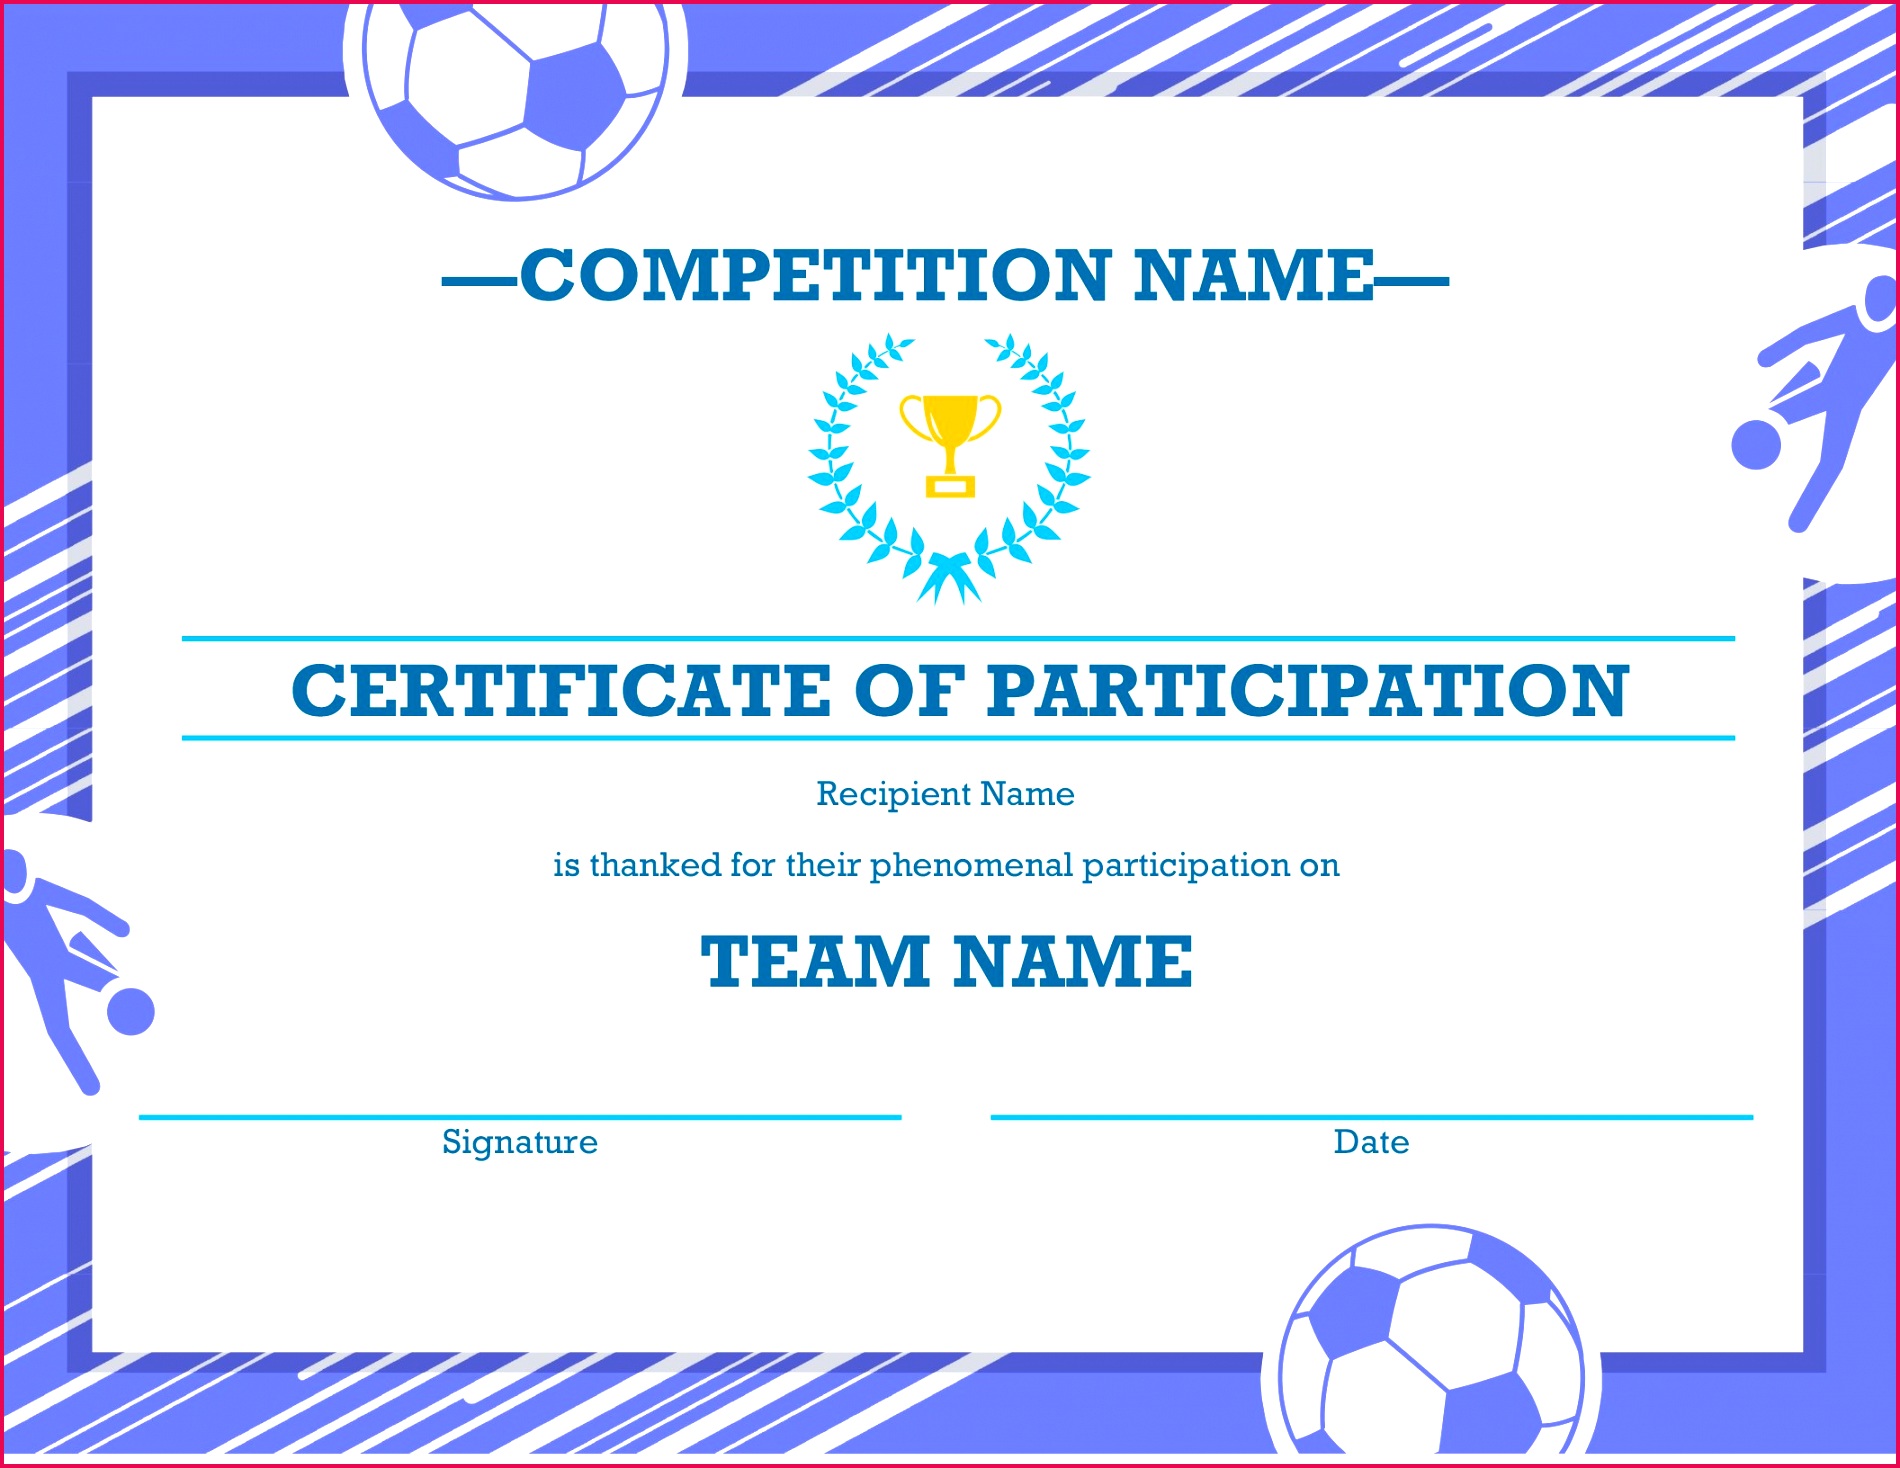 Employee Of The Month Certificate Template